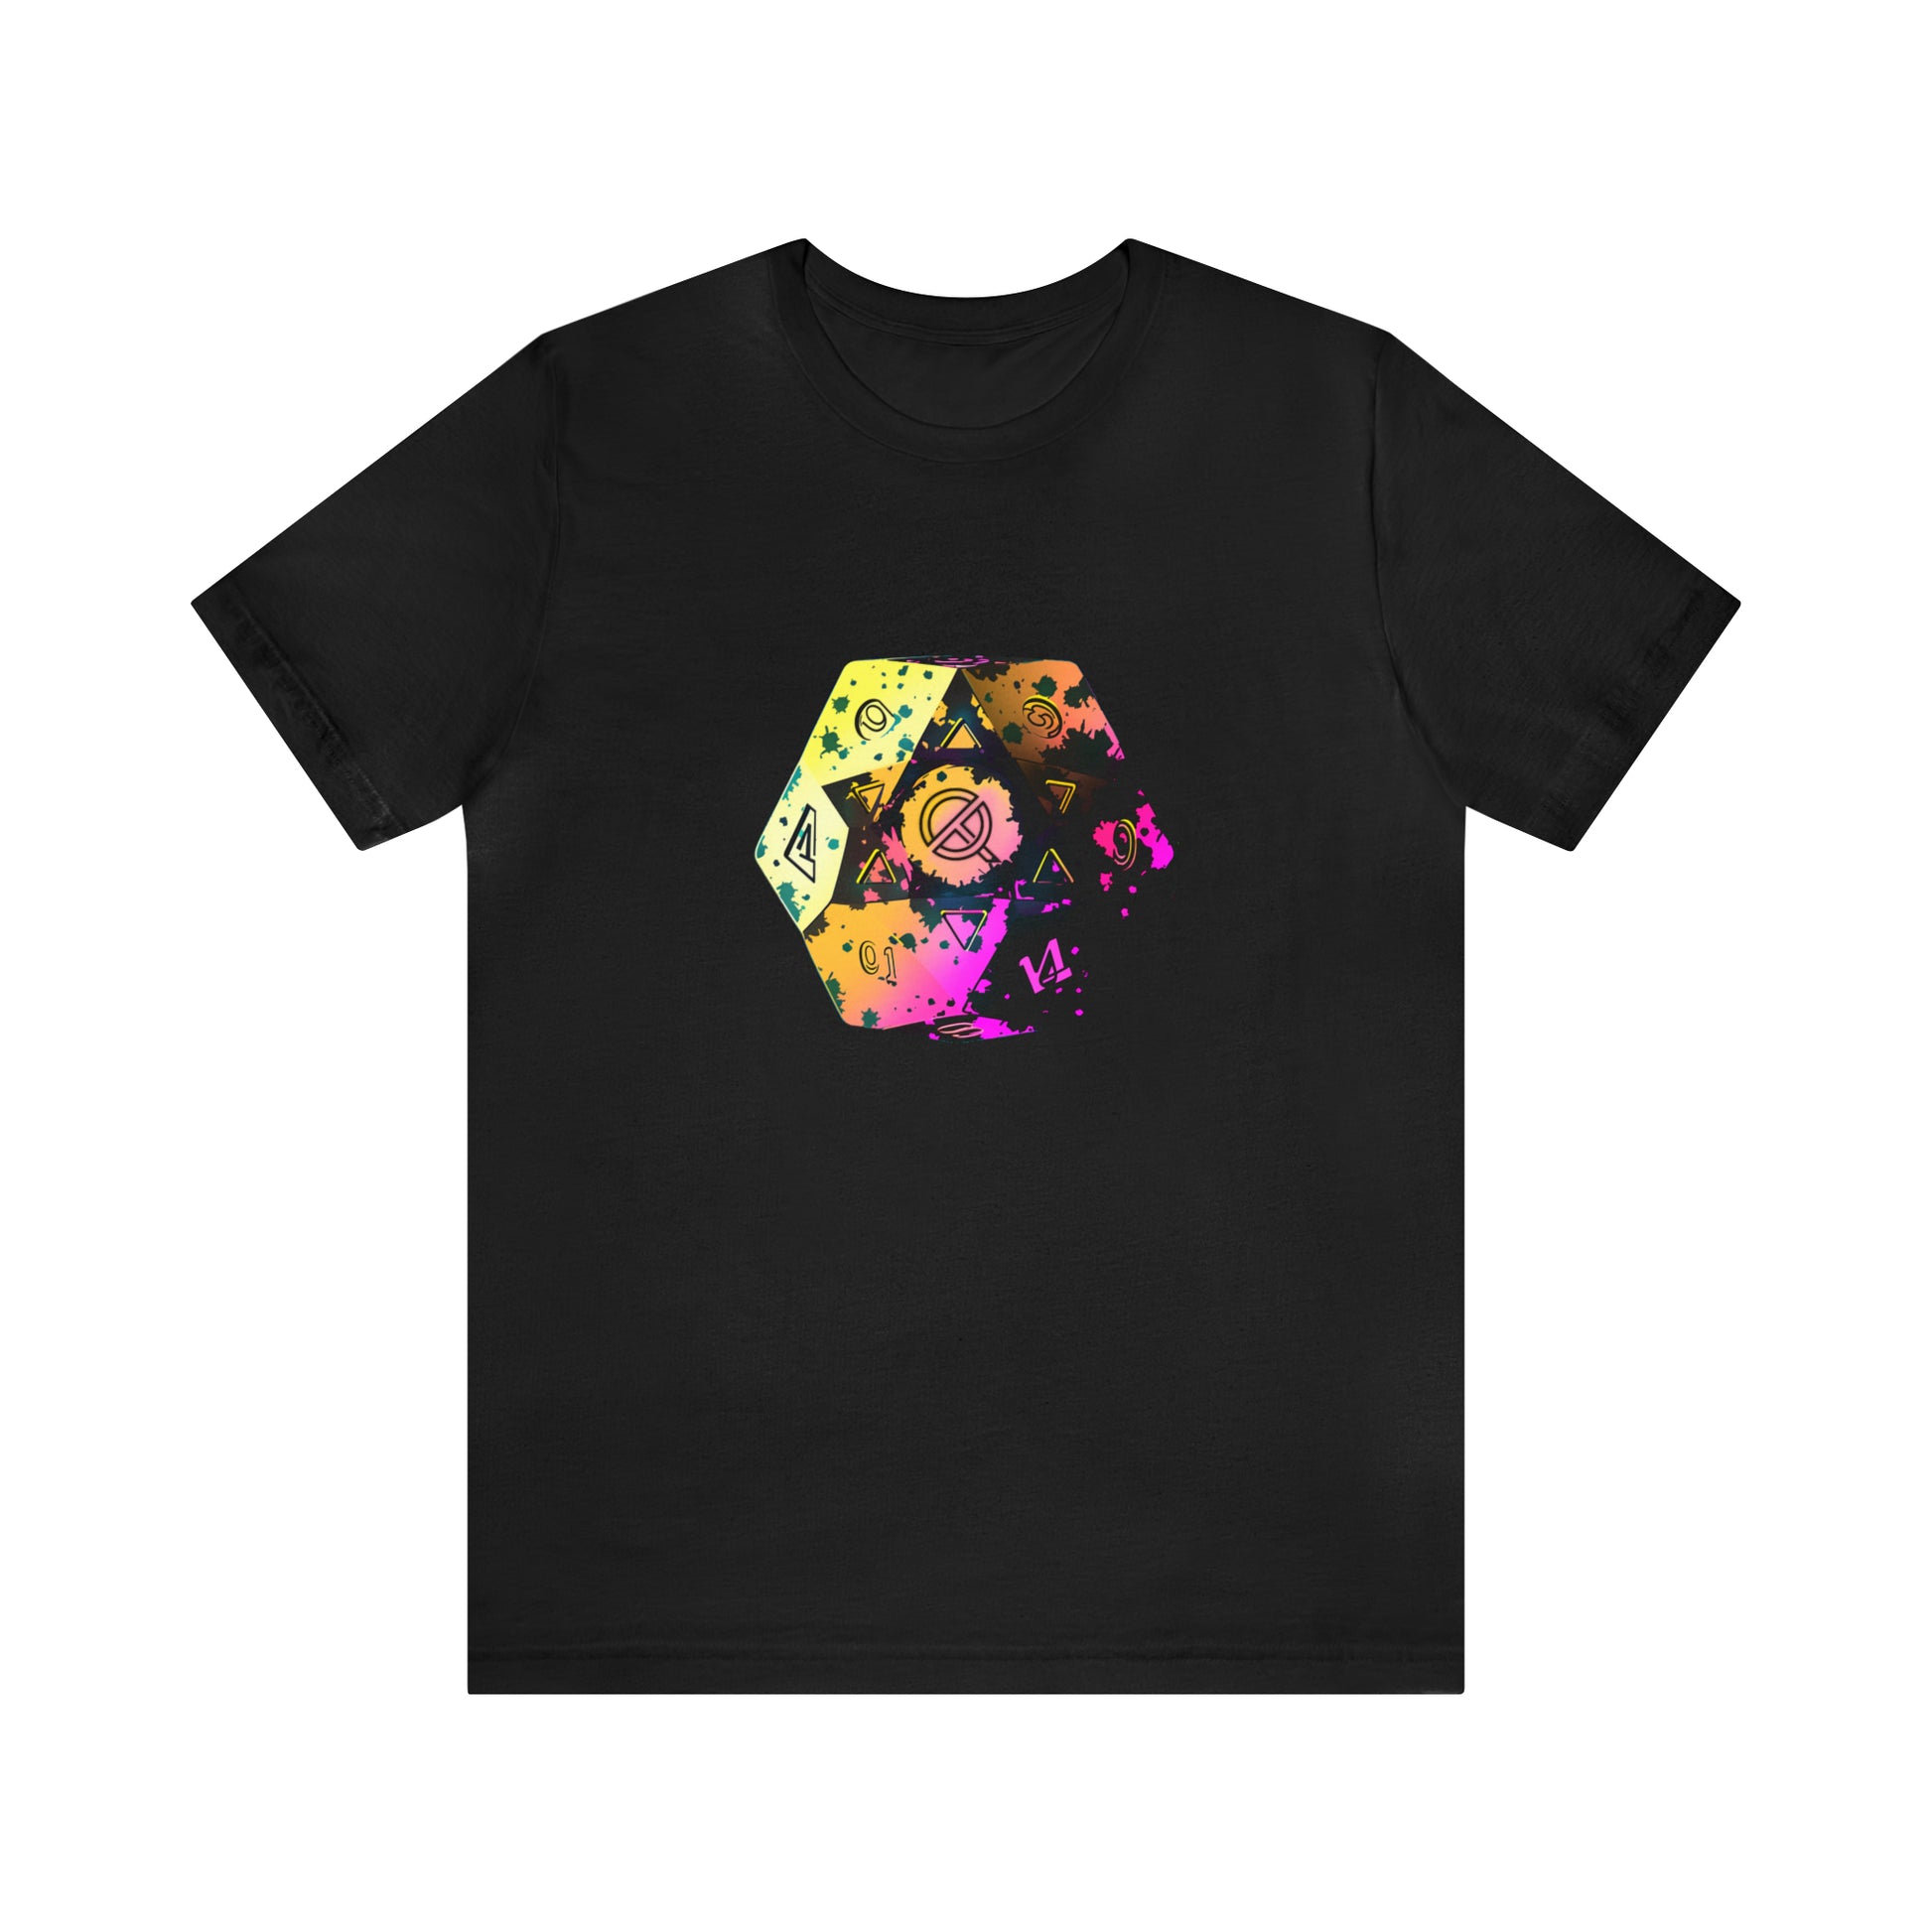 black-quest-thread-tee-shirt-with-large-neon-d20-dice-on-center